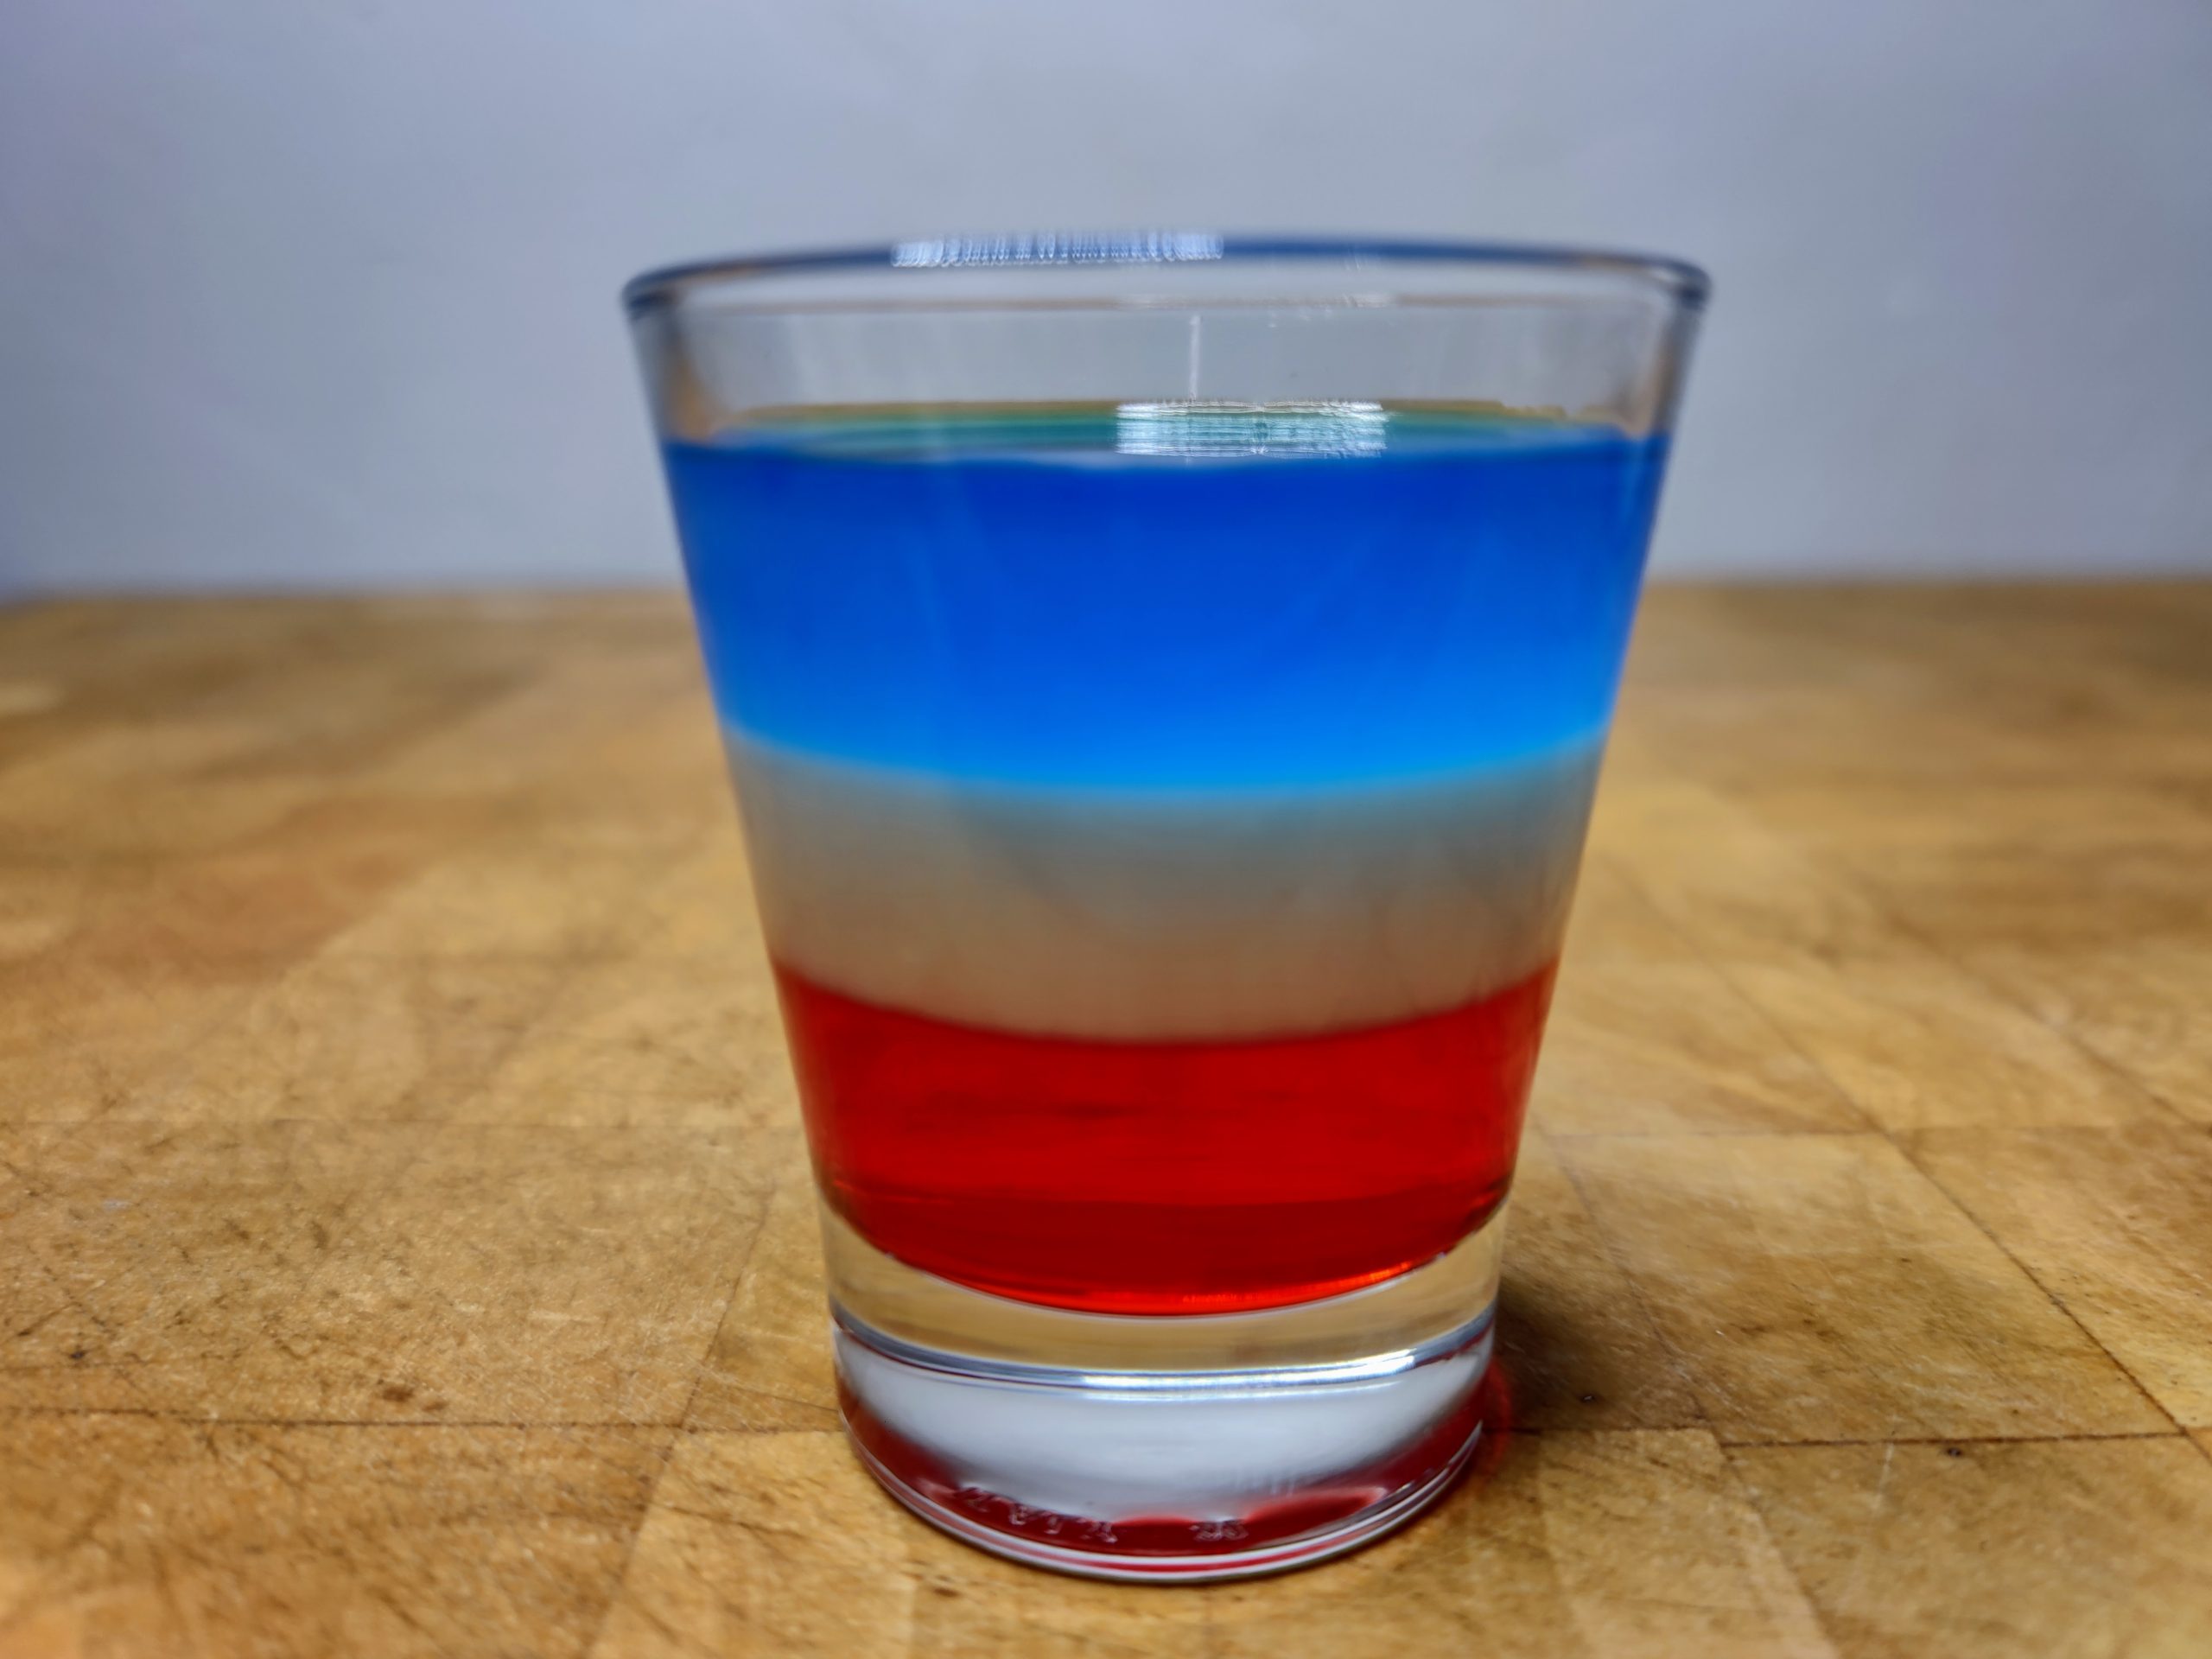 Bomb pop shot in a shot glass on a wooden table.